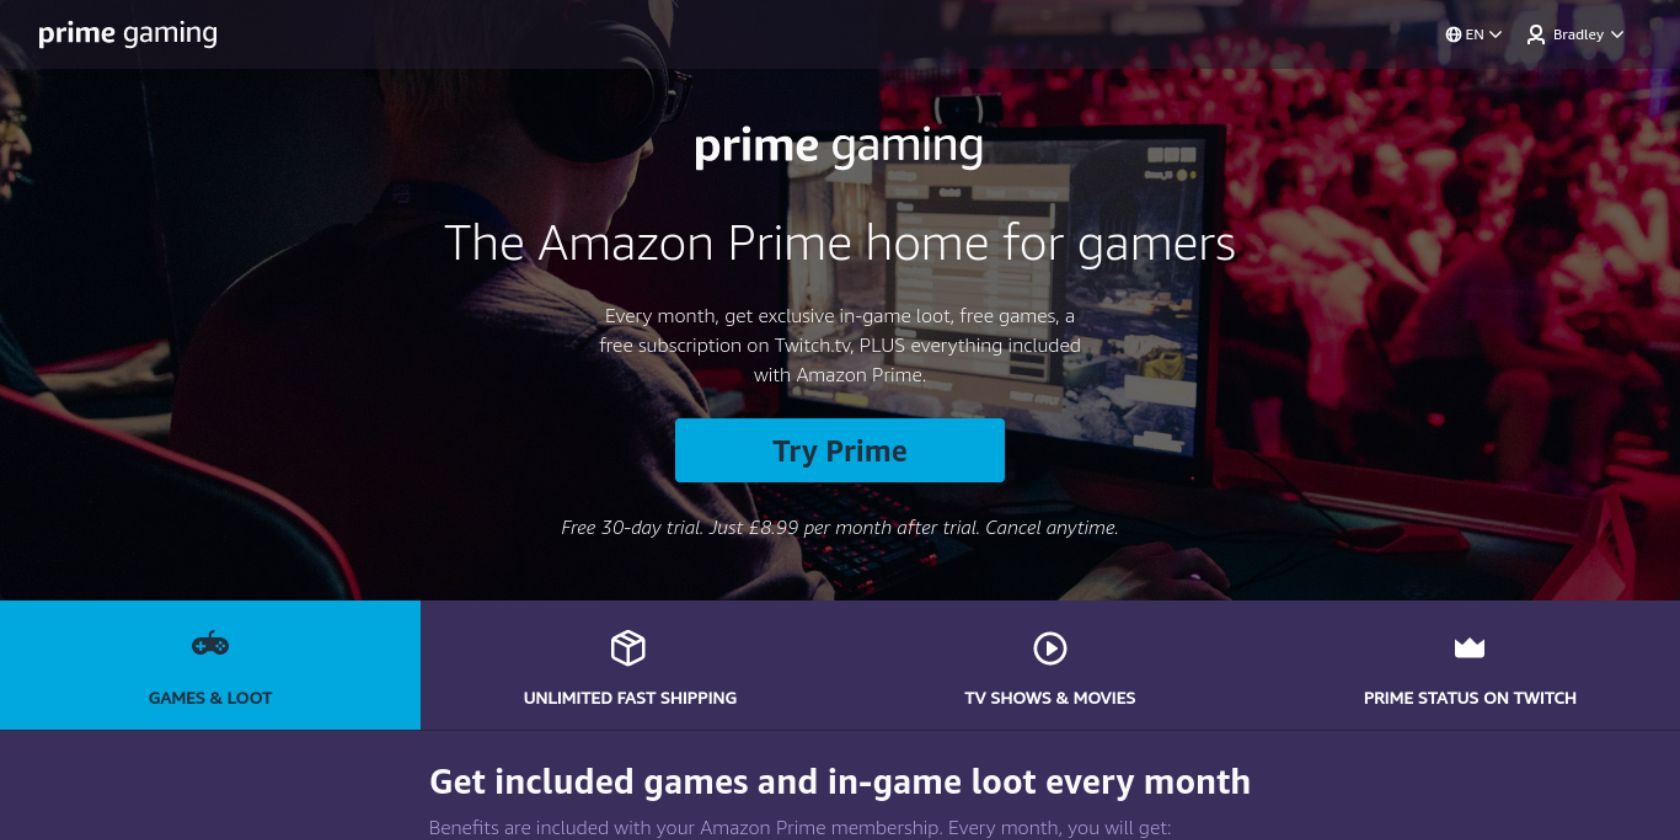 The trial page for Amazon Prime Gaming